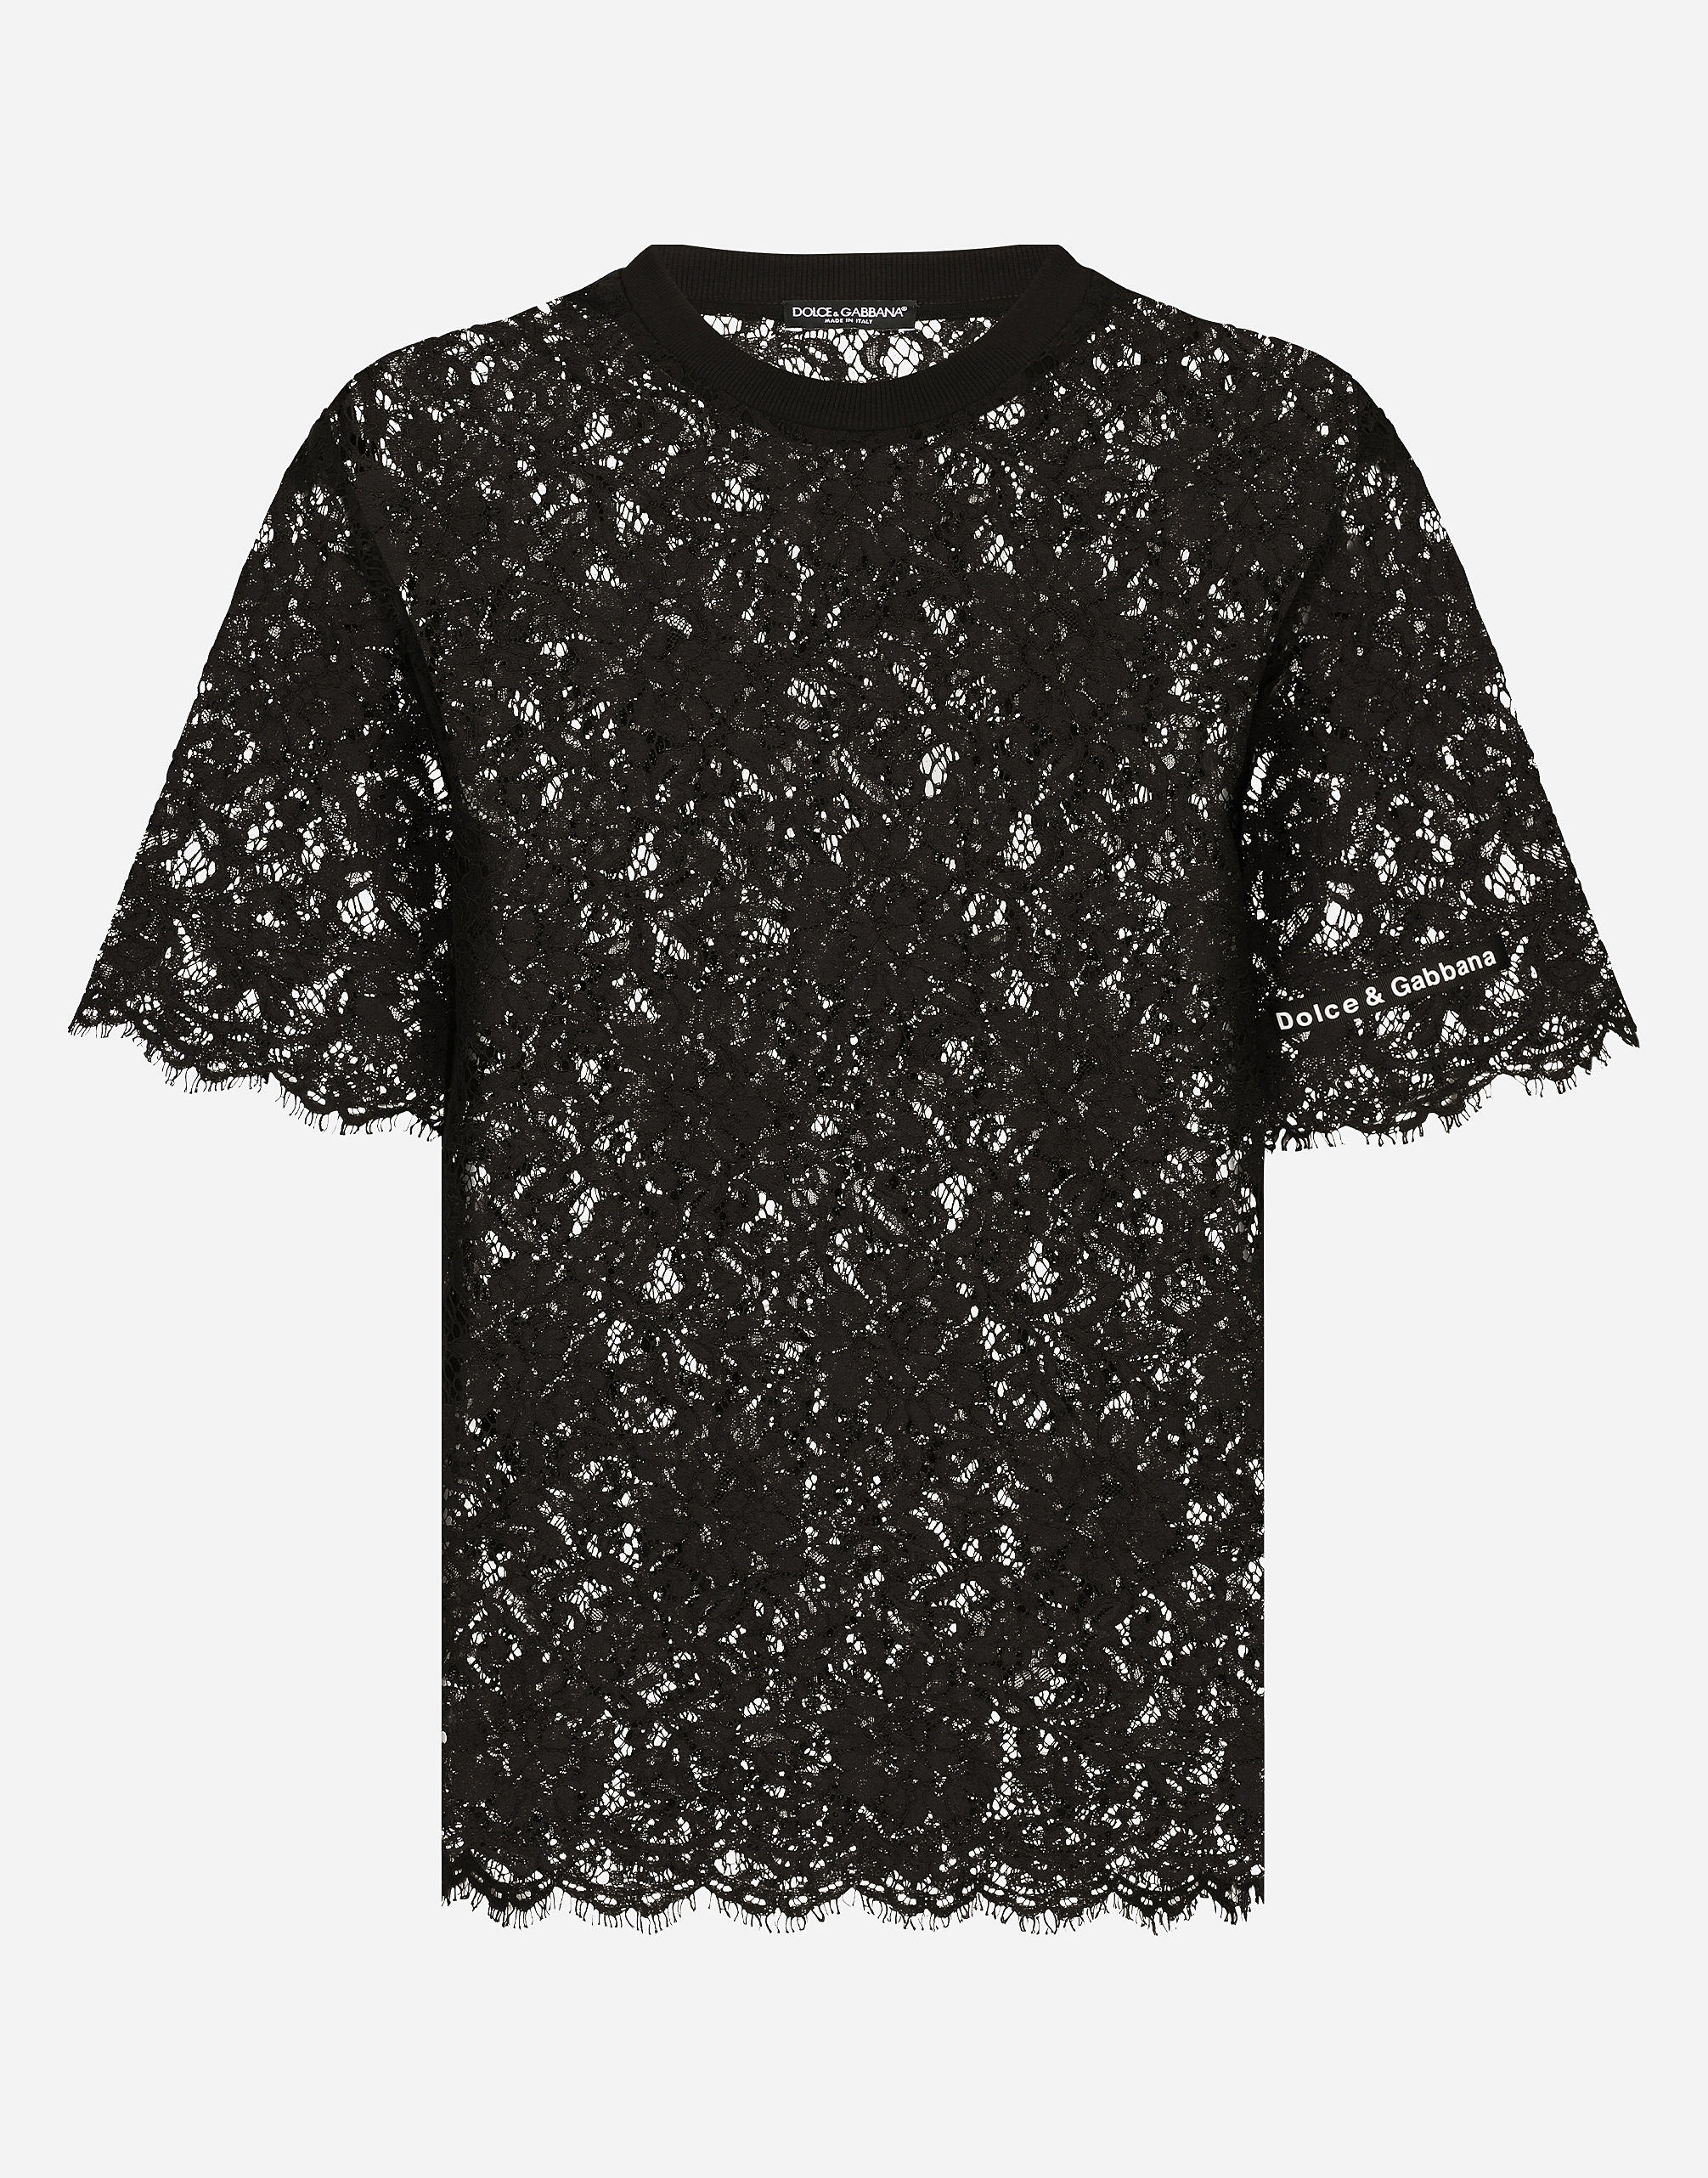 Lace T-shirt with Dolce & Gabbana logo in Black